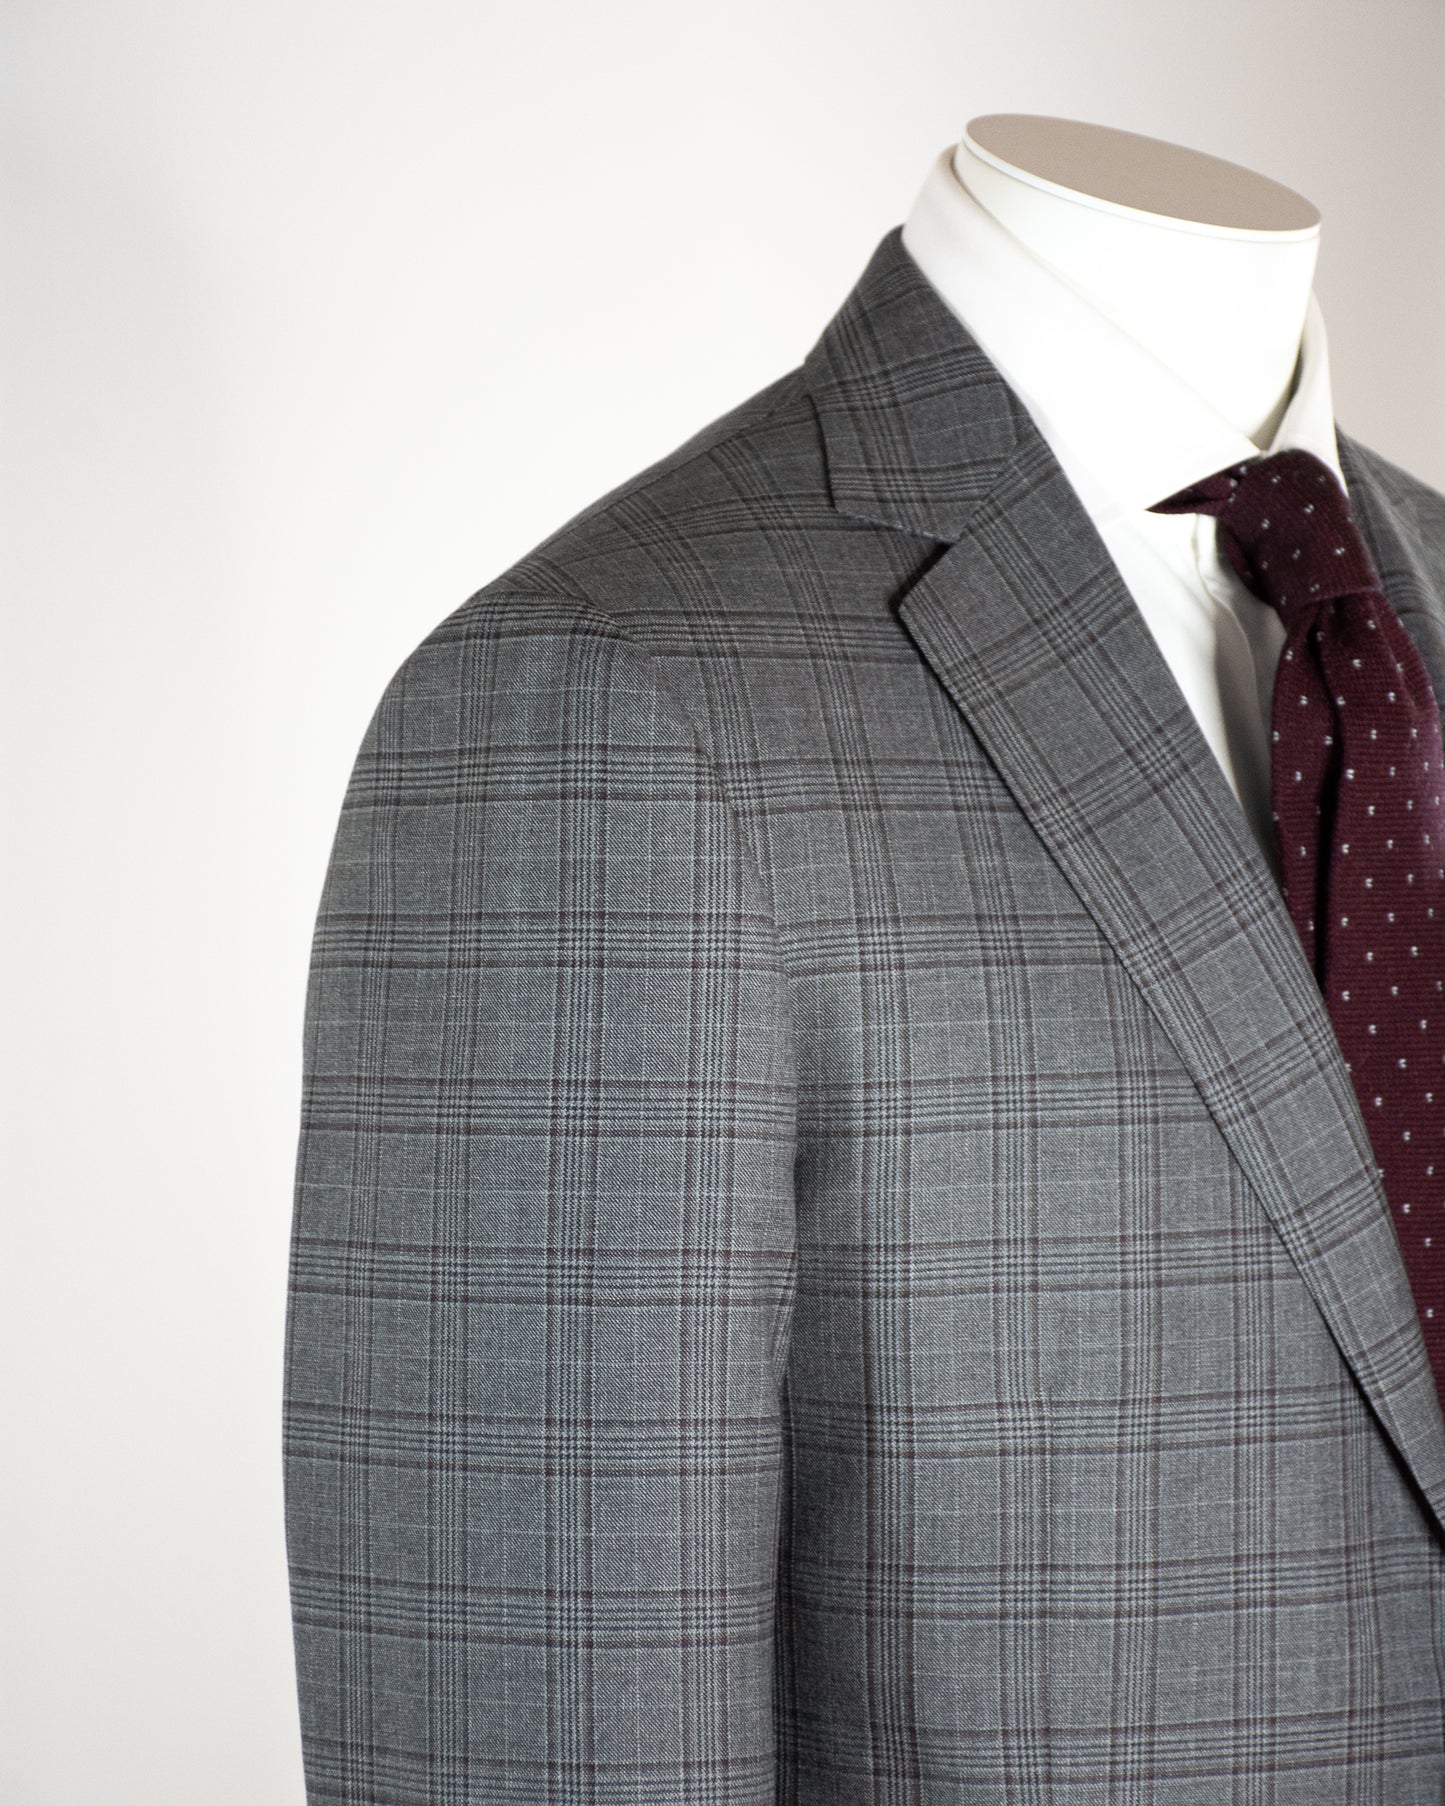 PAL ZILERI Prince of Wales Check Suit